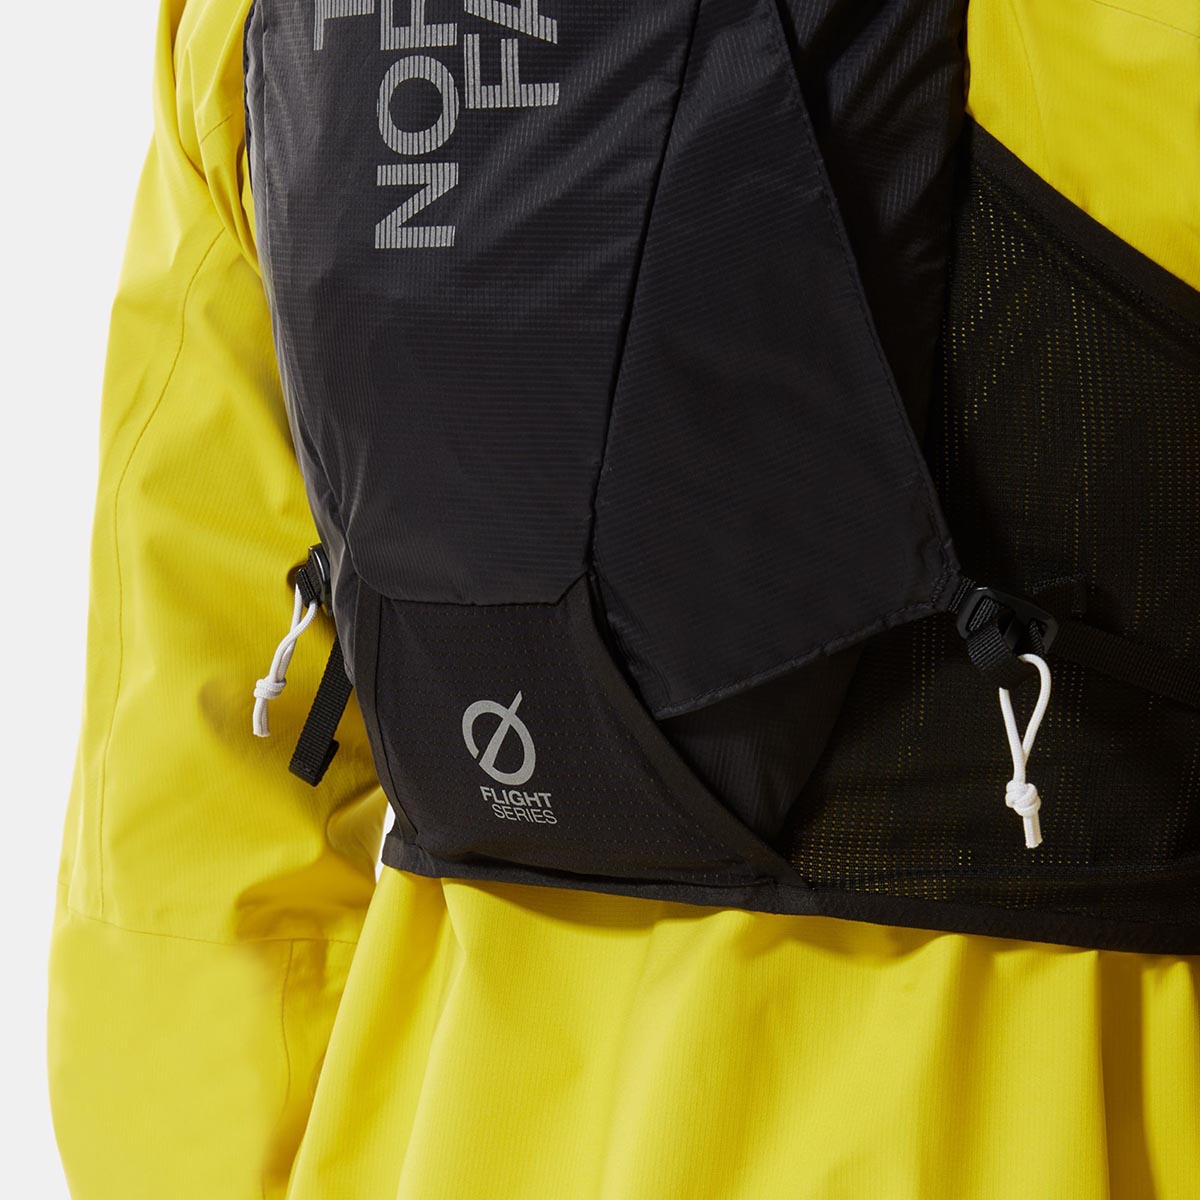 THE NORTH FACE - FLIGHT TRAINING PACK 12 L